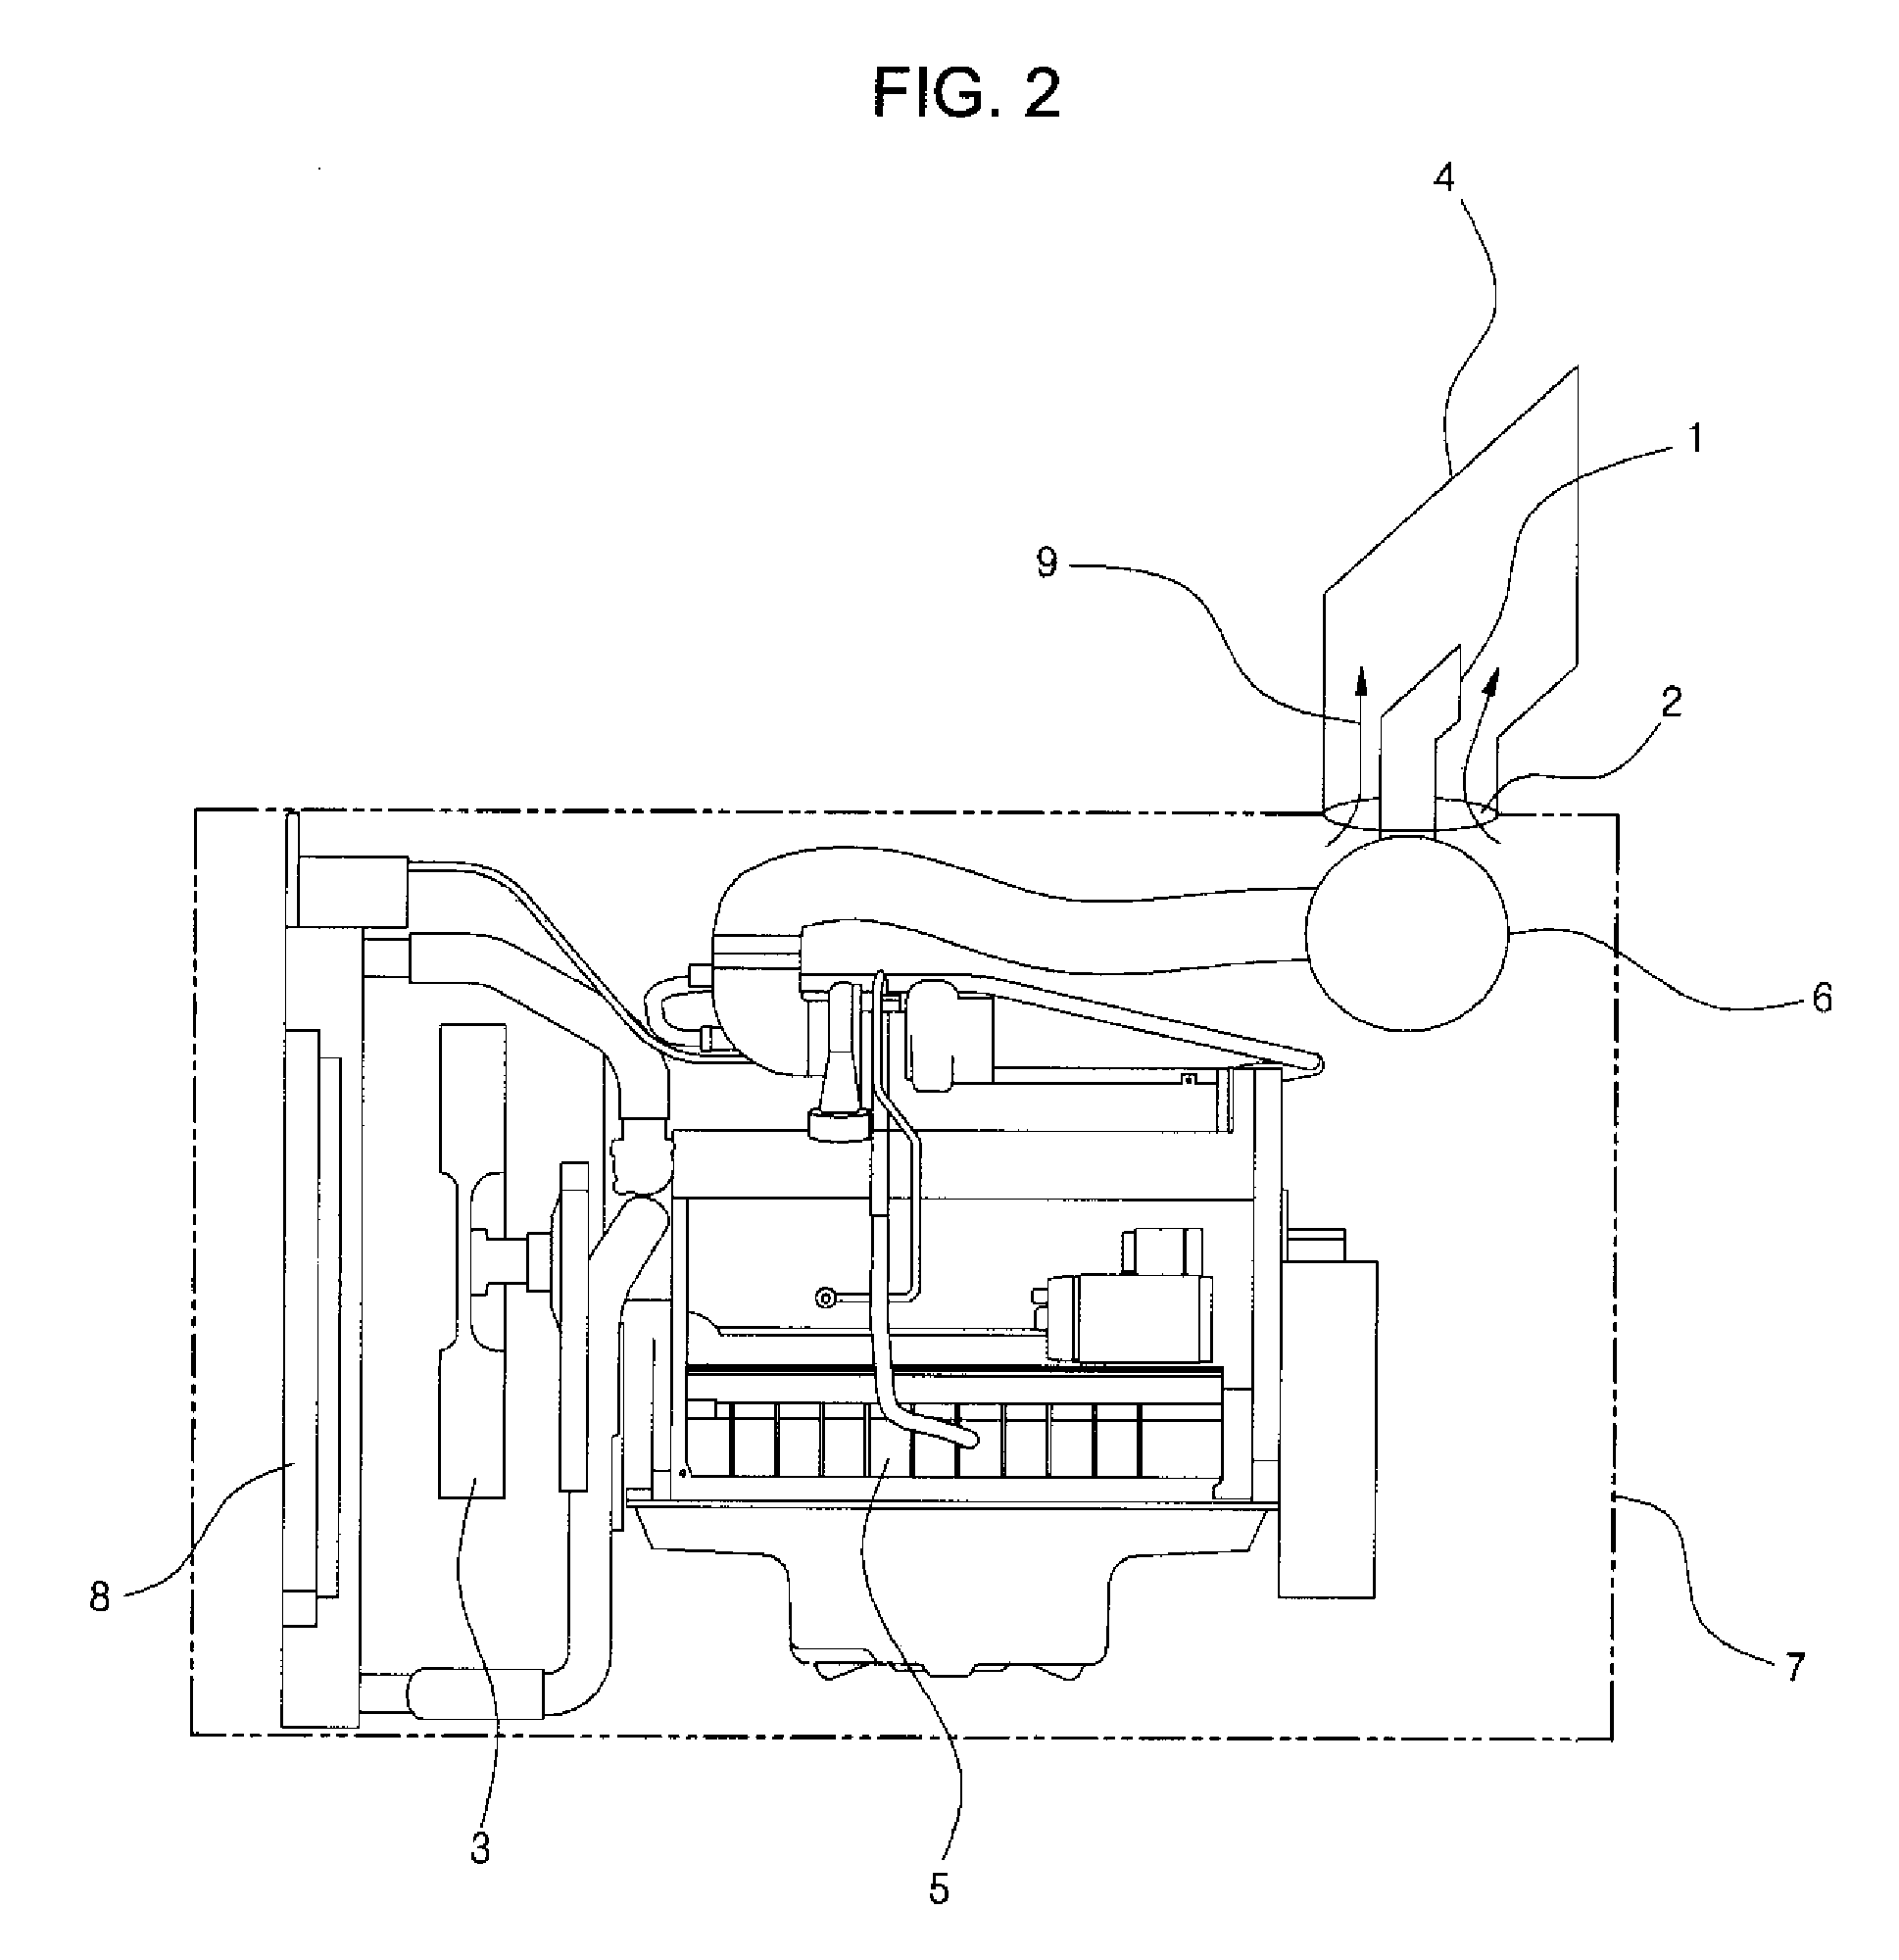 Apparatus for cooling overheated gas in engine room